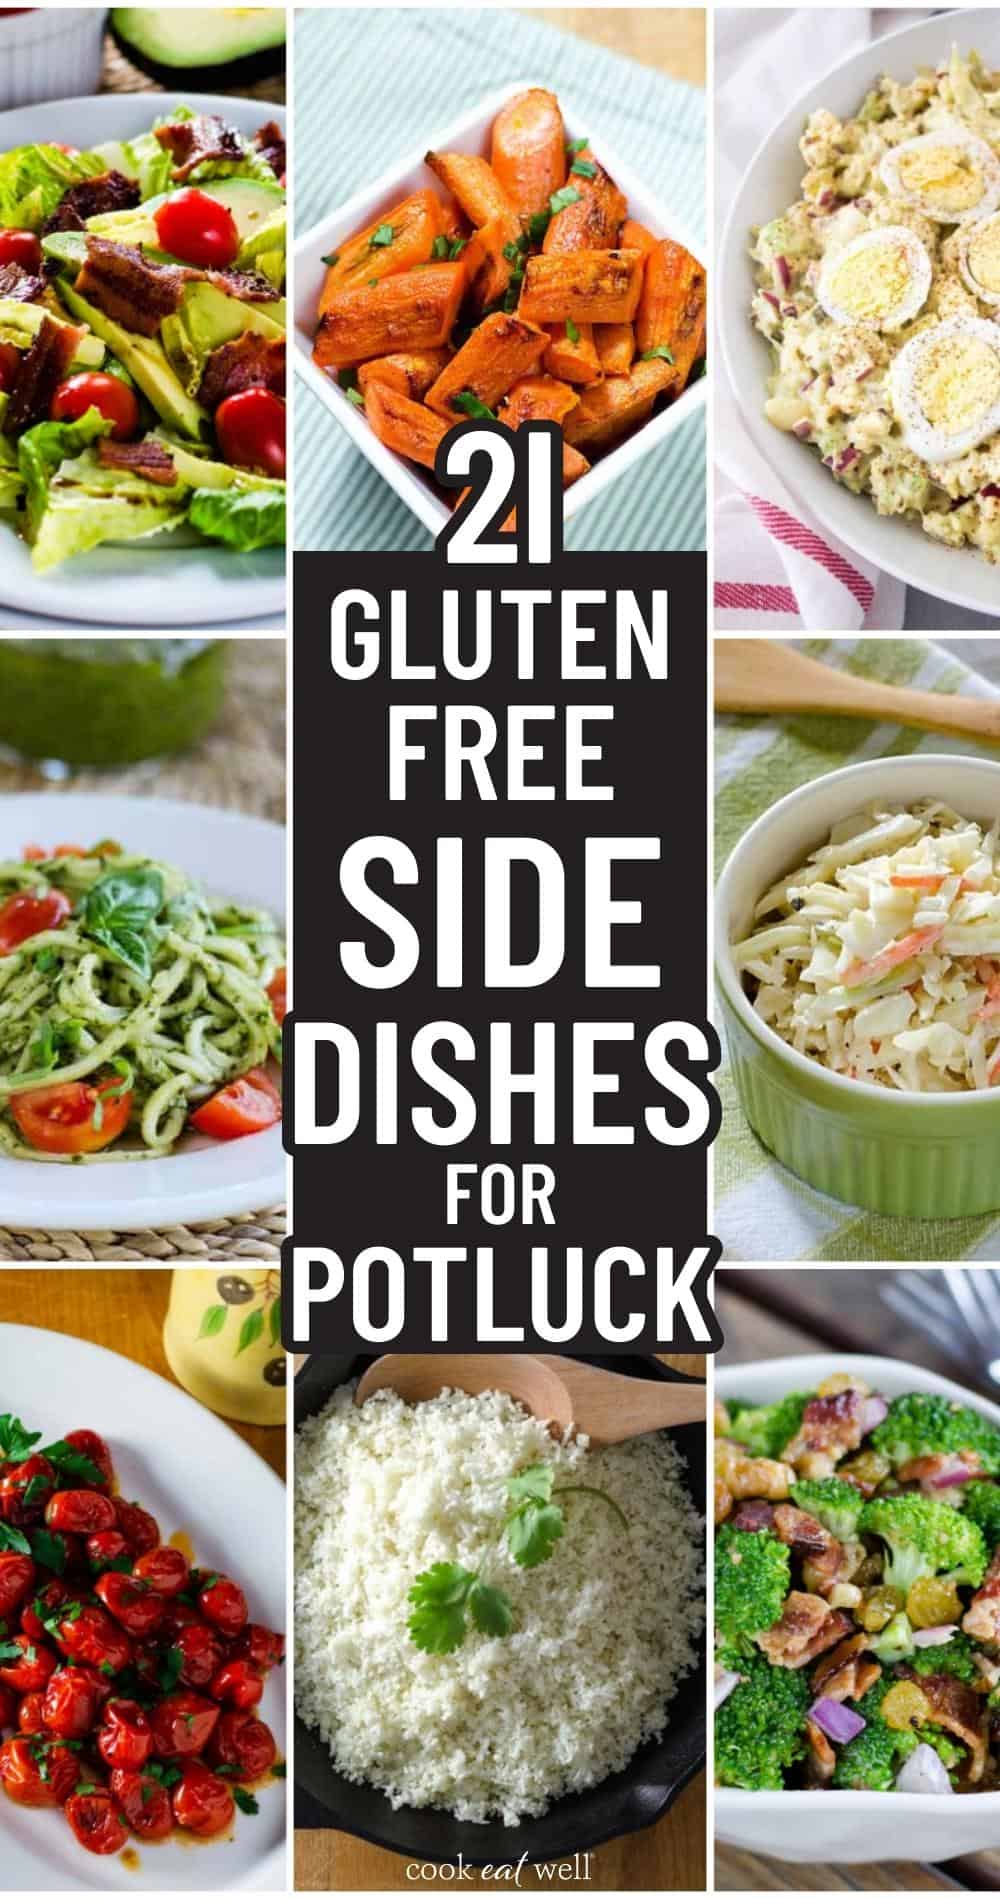 21 Low Carb Potluck Side Dishes Everyone Will Love - Cook Eat Well